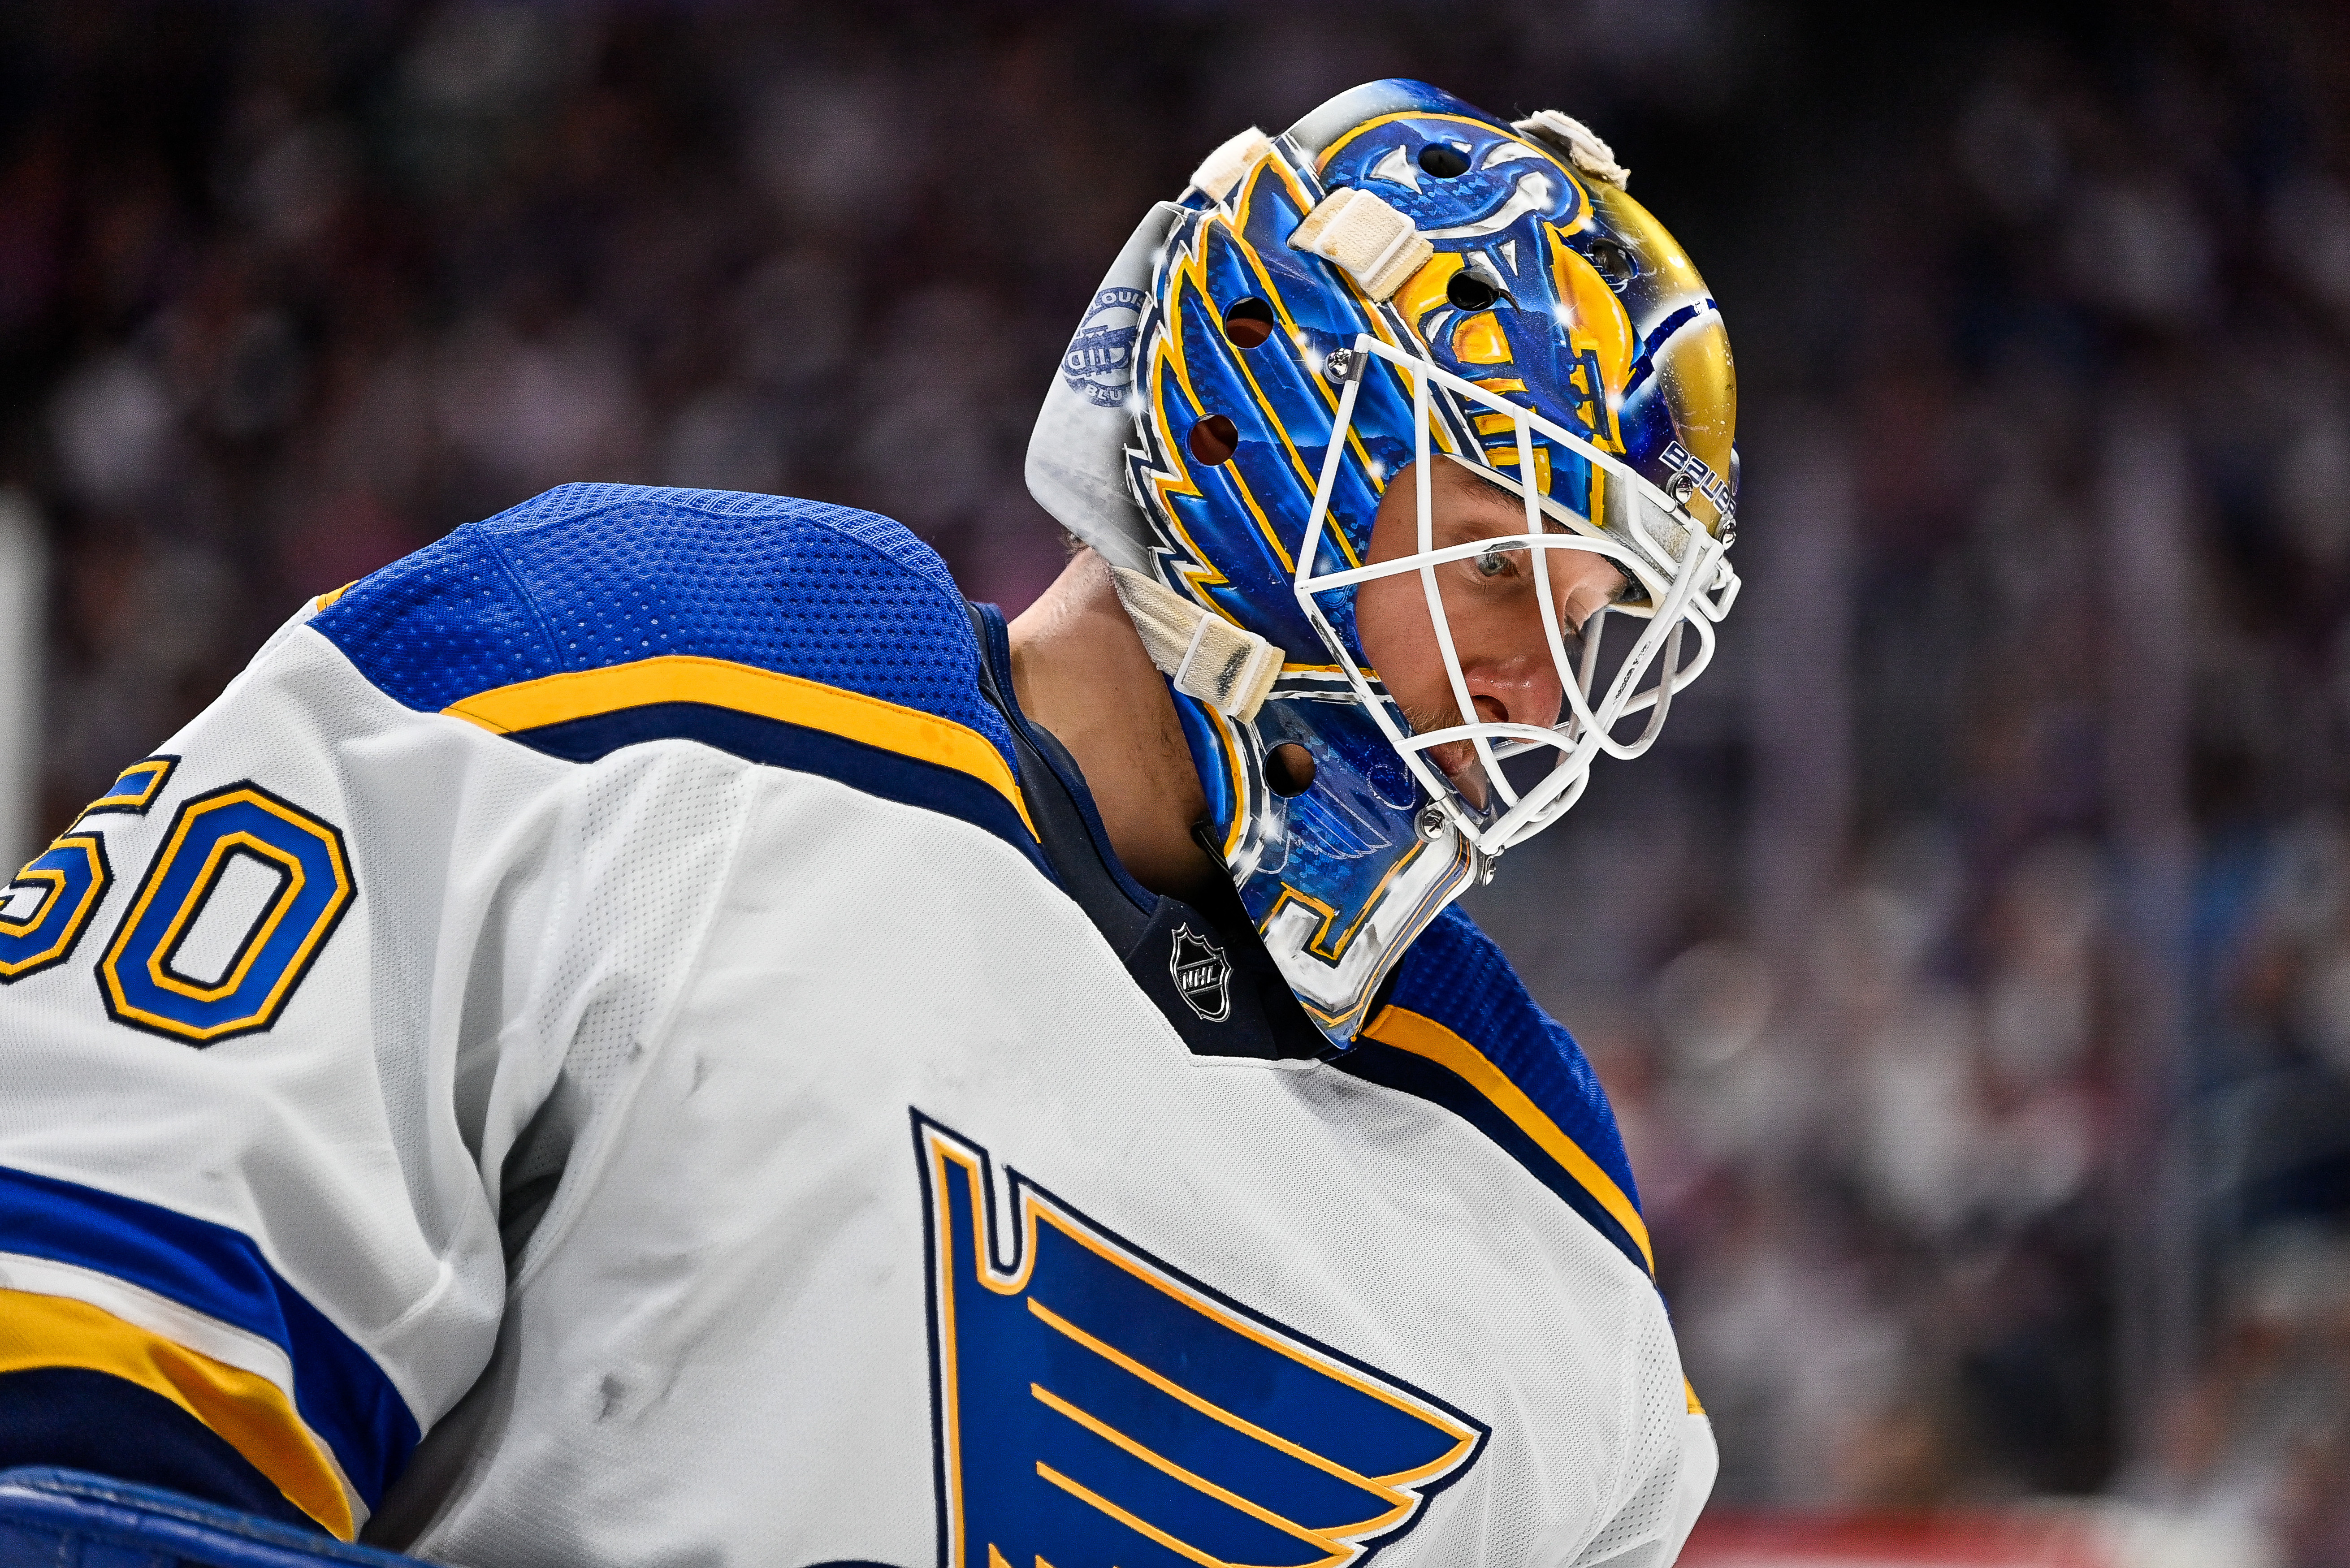 Binnington out to beat Bruins who took him in